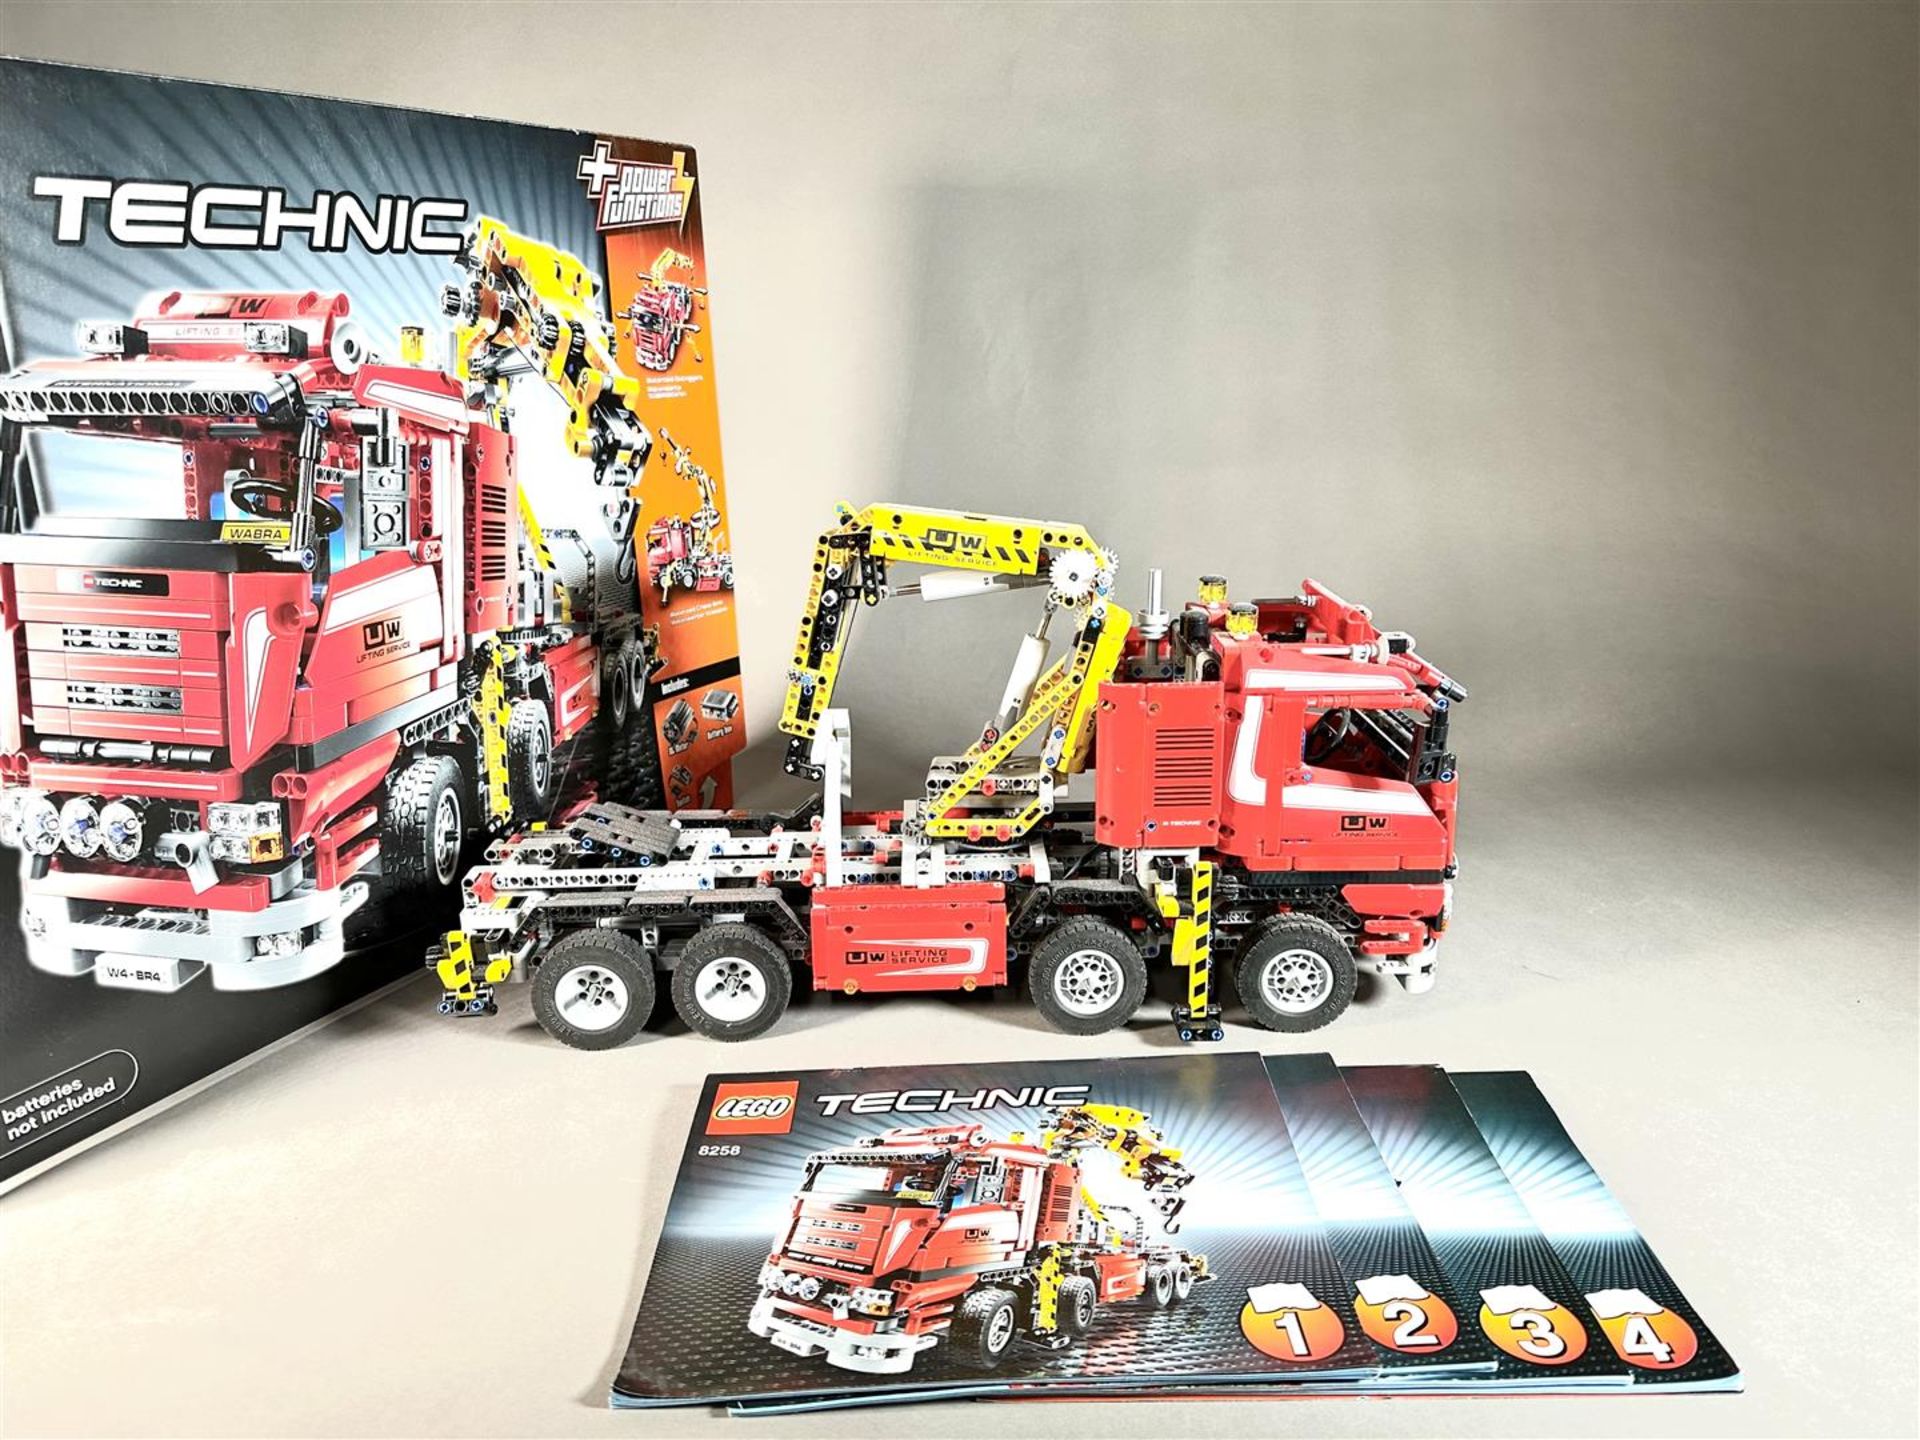 LEGO - Technic - 8258 - Truck - Crane Truck with Power Functions - Image 2 of 2